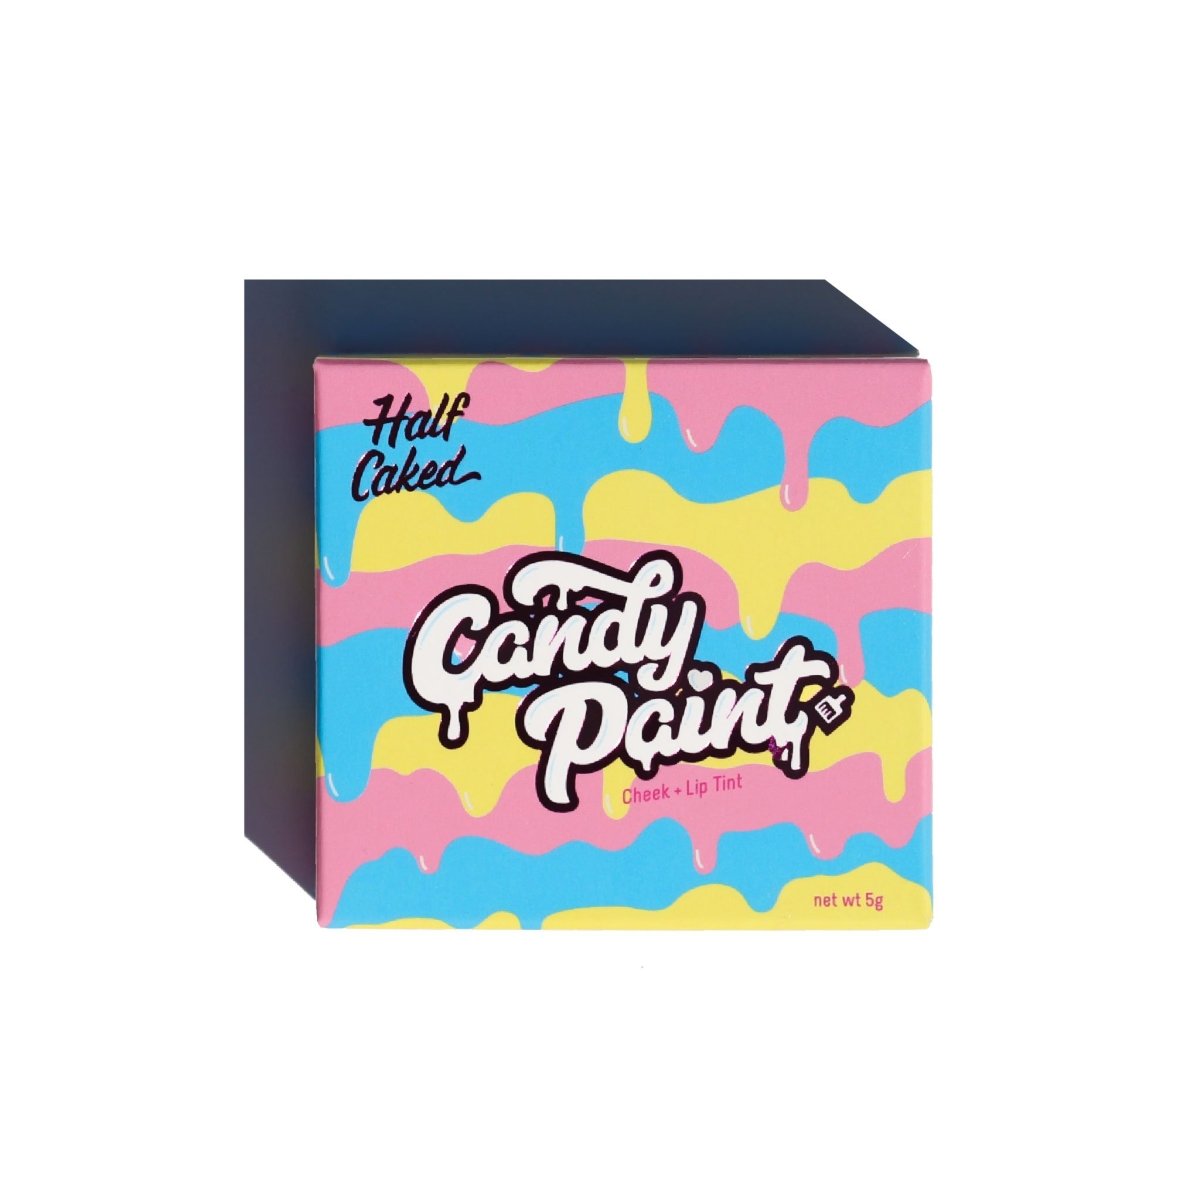 pink blue yellow box with candy paint on front - candy paint cheek + lip tint - half caked makeup